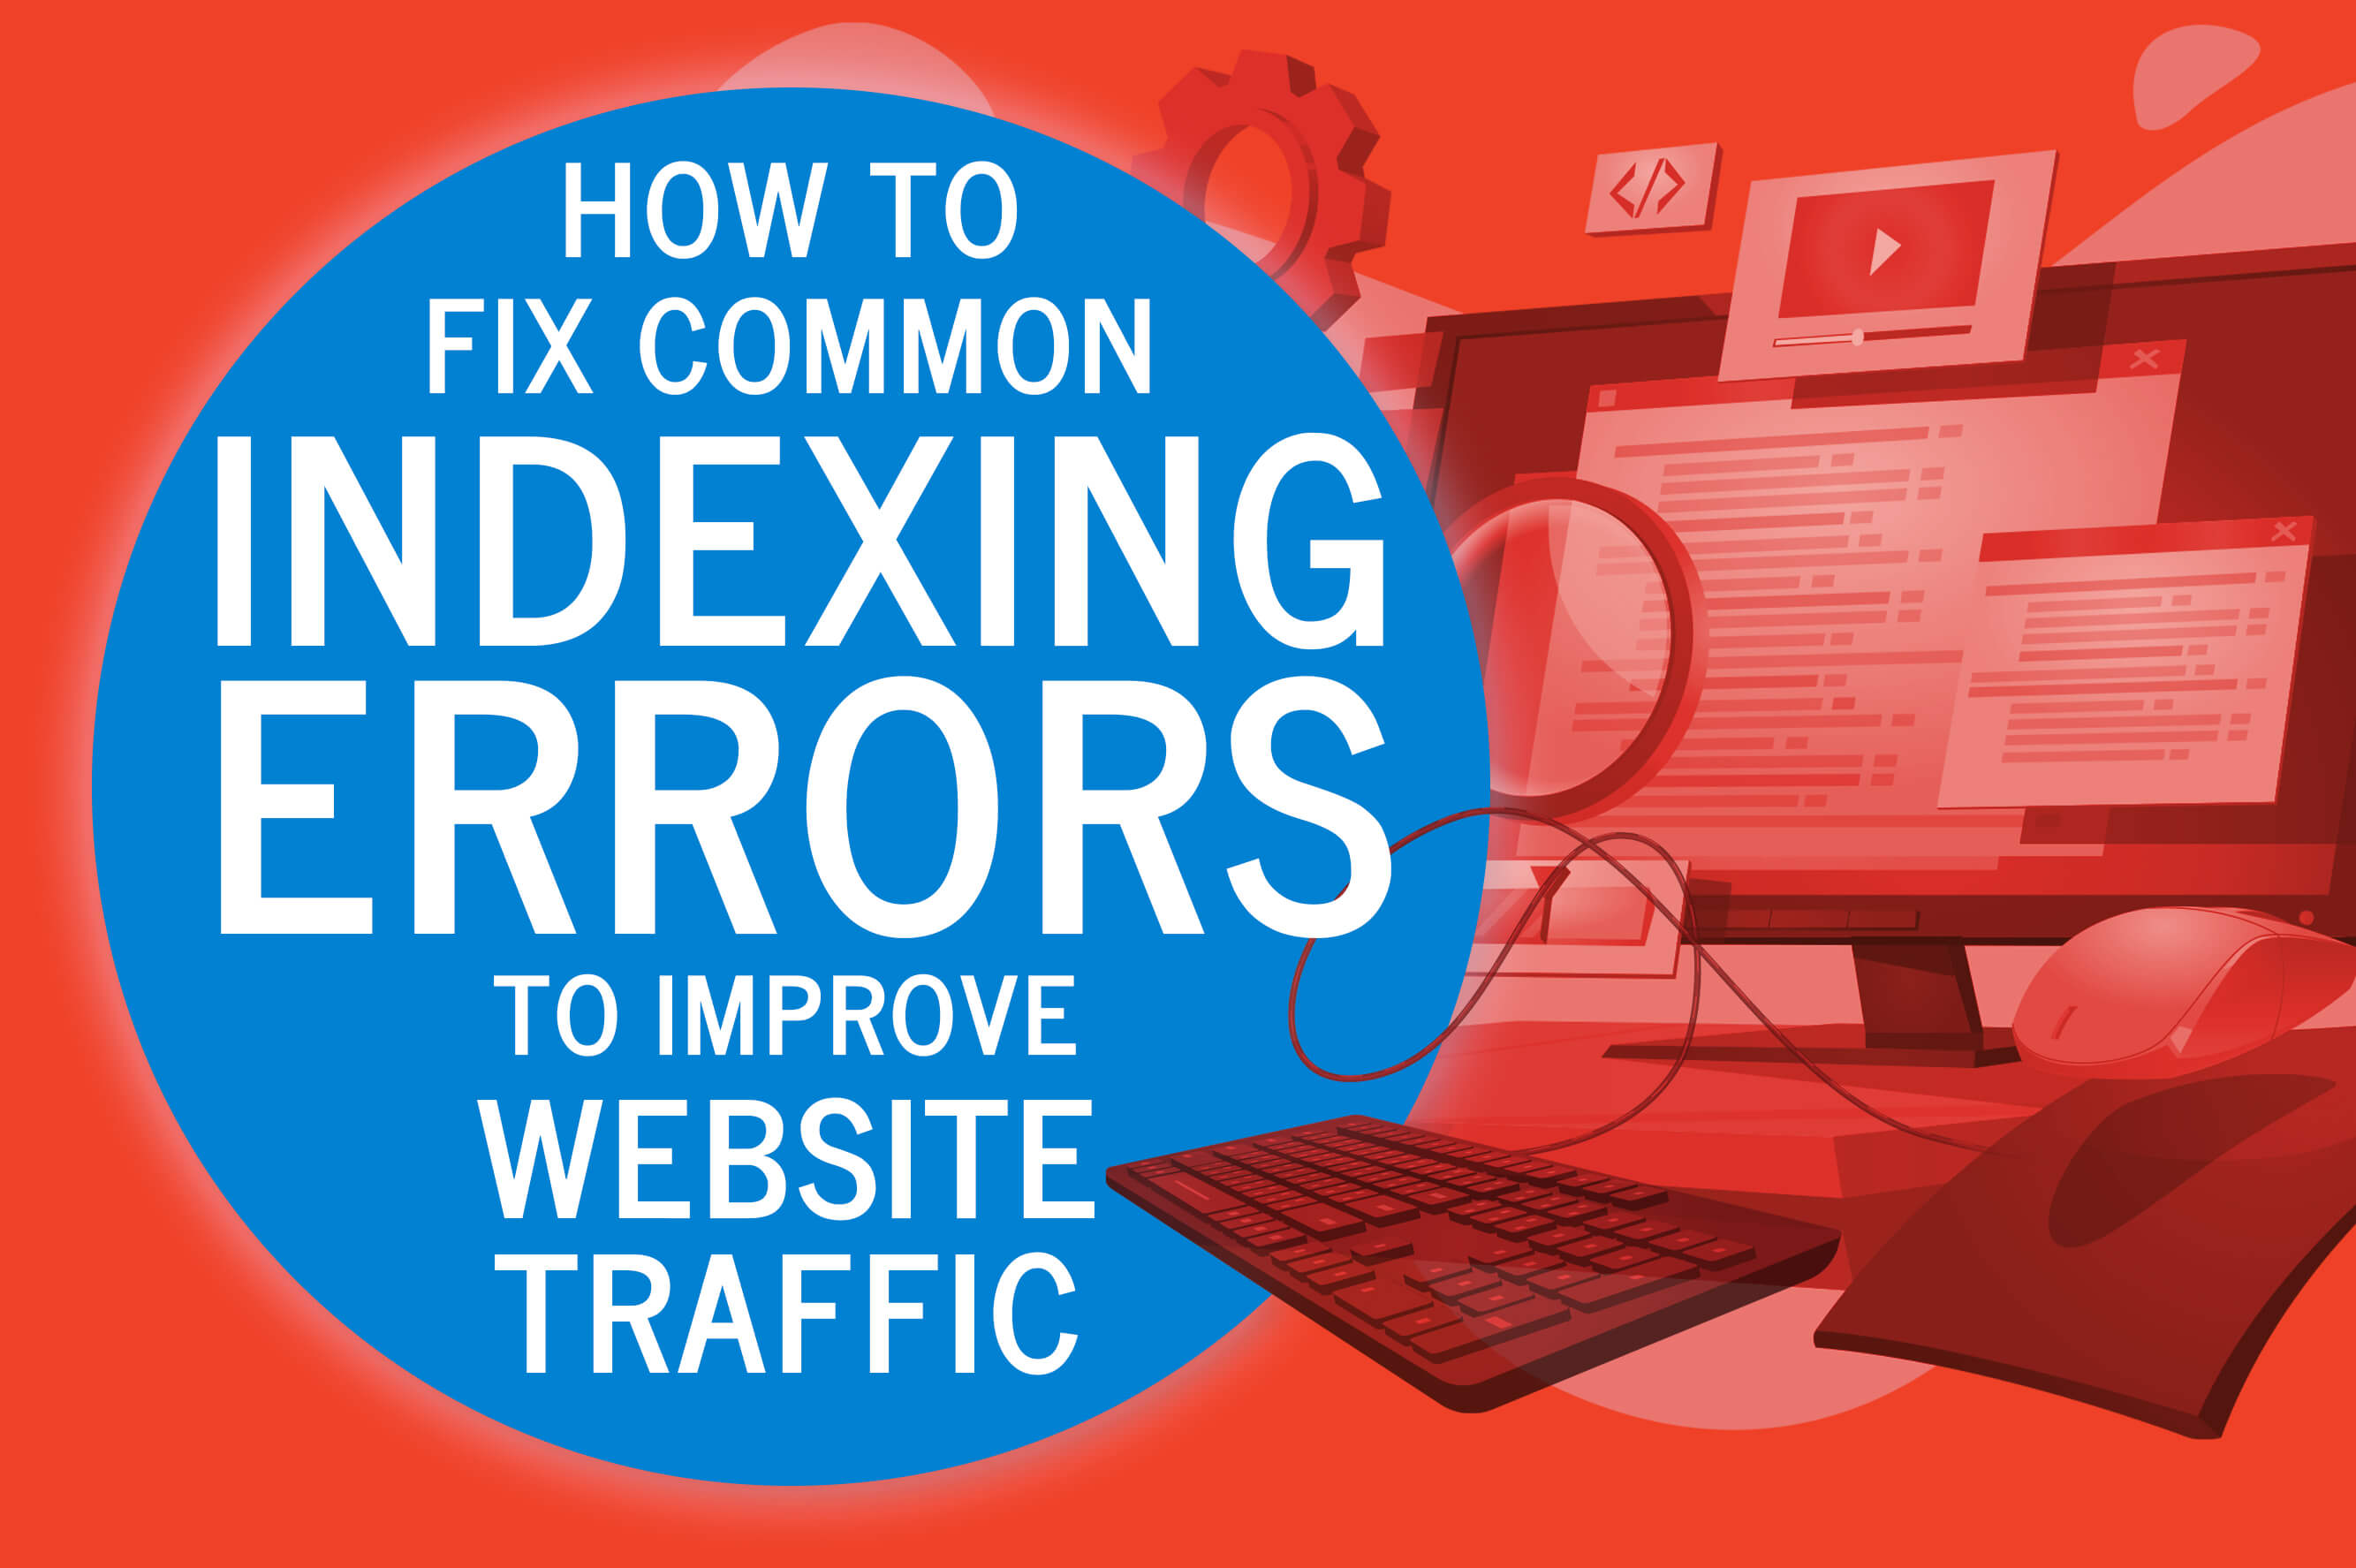 How to Fix Common Indexing Errors to Improve Website Traffic